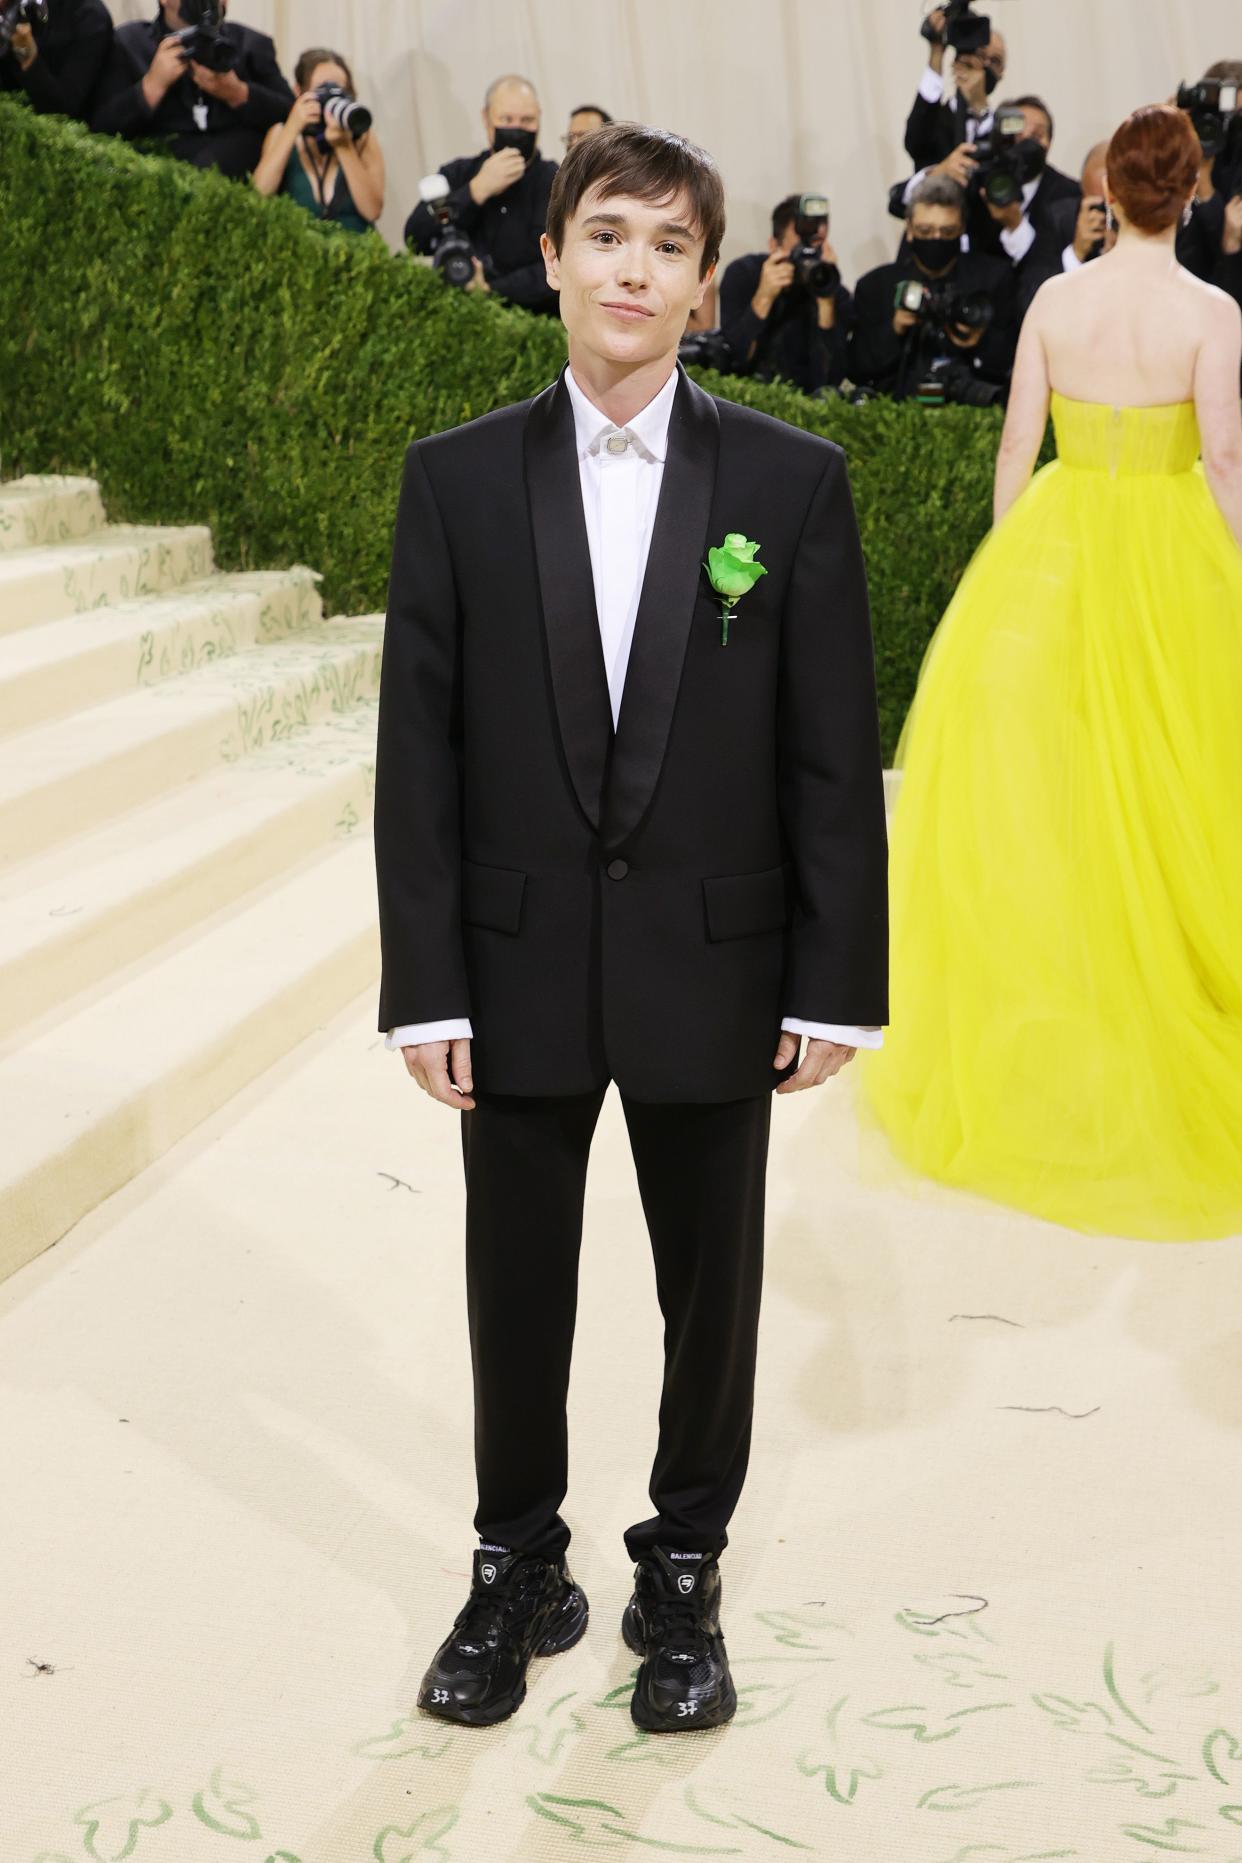 Elliot Page attends The 2021 Met Gala Celebrating In America: A Lexicon Of Fashion at Metropolitan Museum of Art on Sept. 13, 2021 in New York.